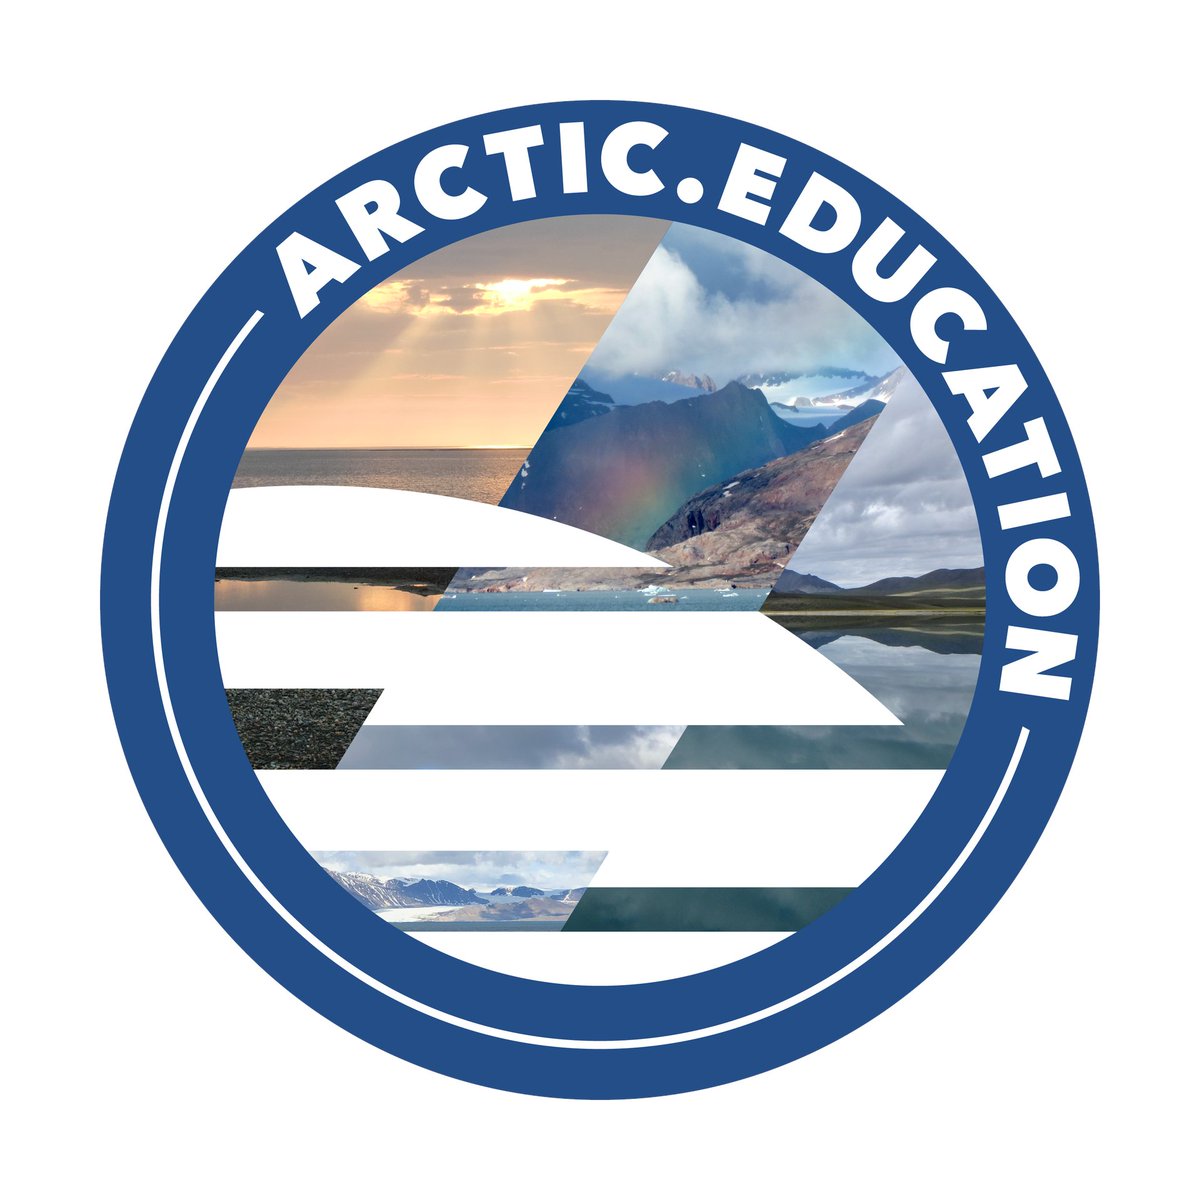 Welcome to Arctic Education -- our updated site at ARCUS, designed to capture all the great education efforts happening across the #Arctic. Find out more at arctic.education #arcticeducation @polartrec @ArcticResearch